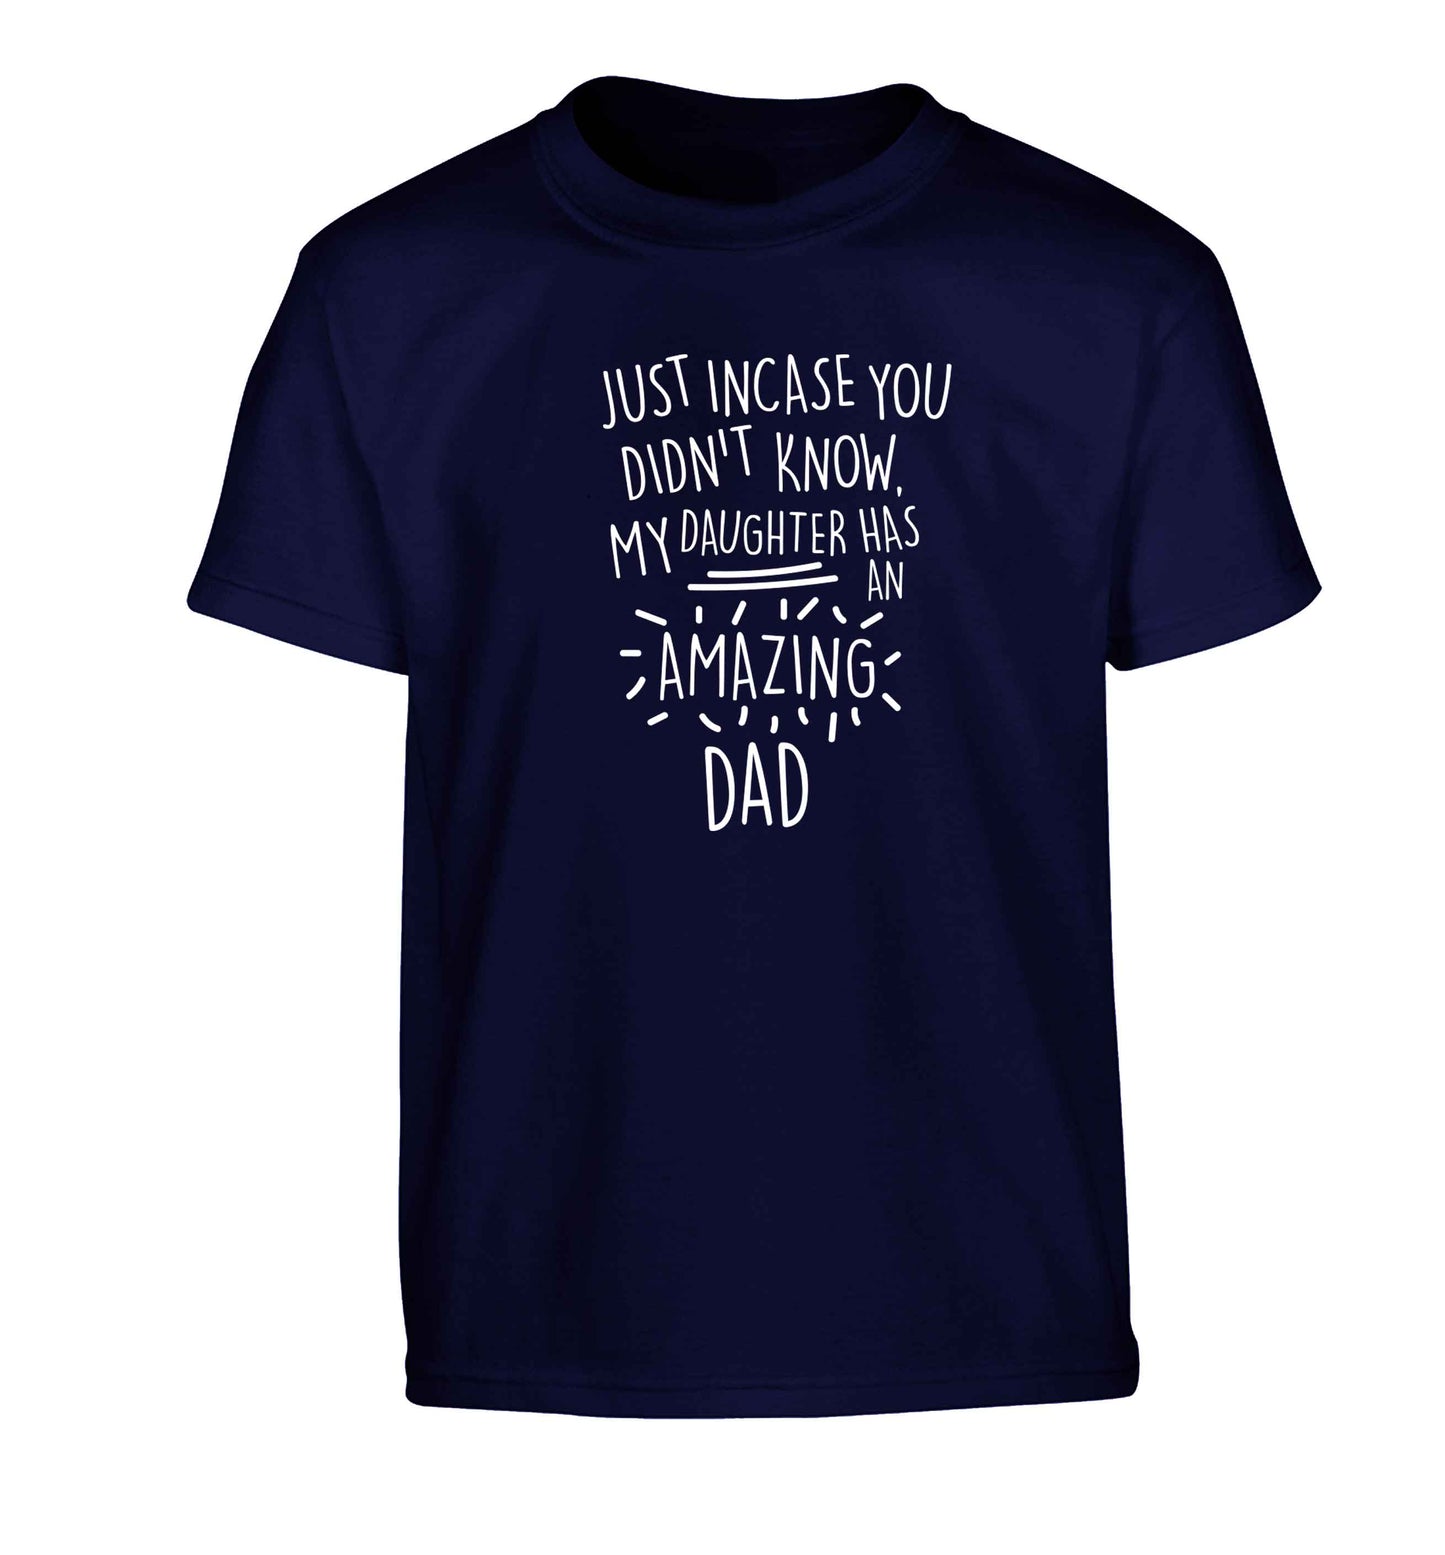 Just incase you didn't know my daughter has an amazing dad Children's navy Tshirt 12-13 Years